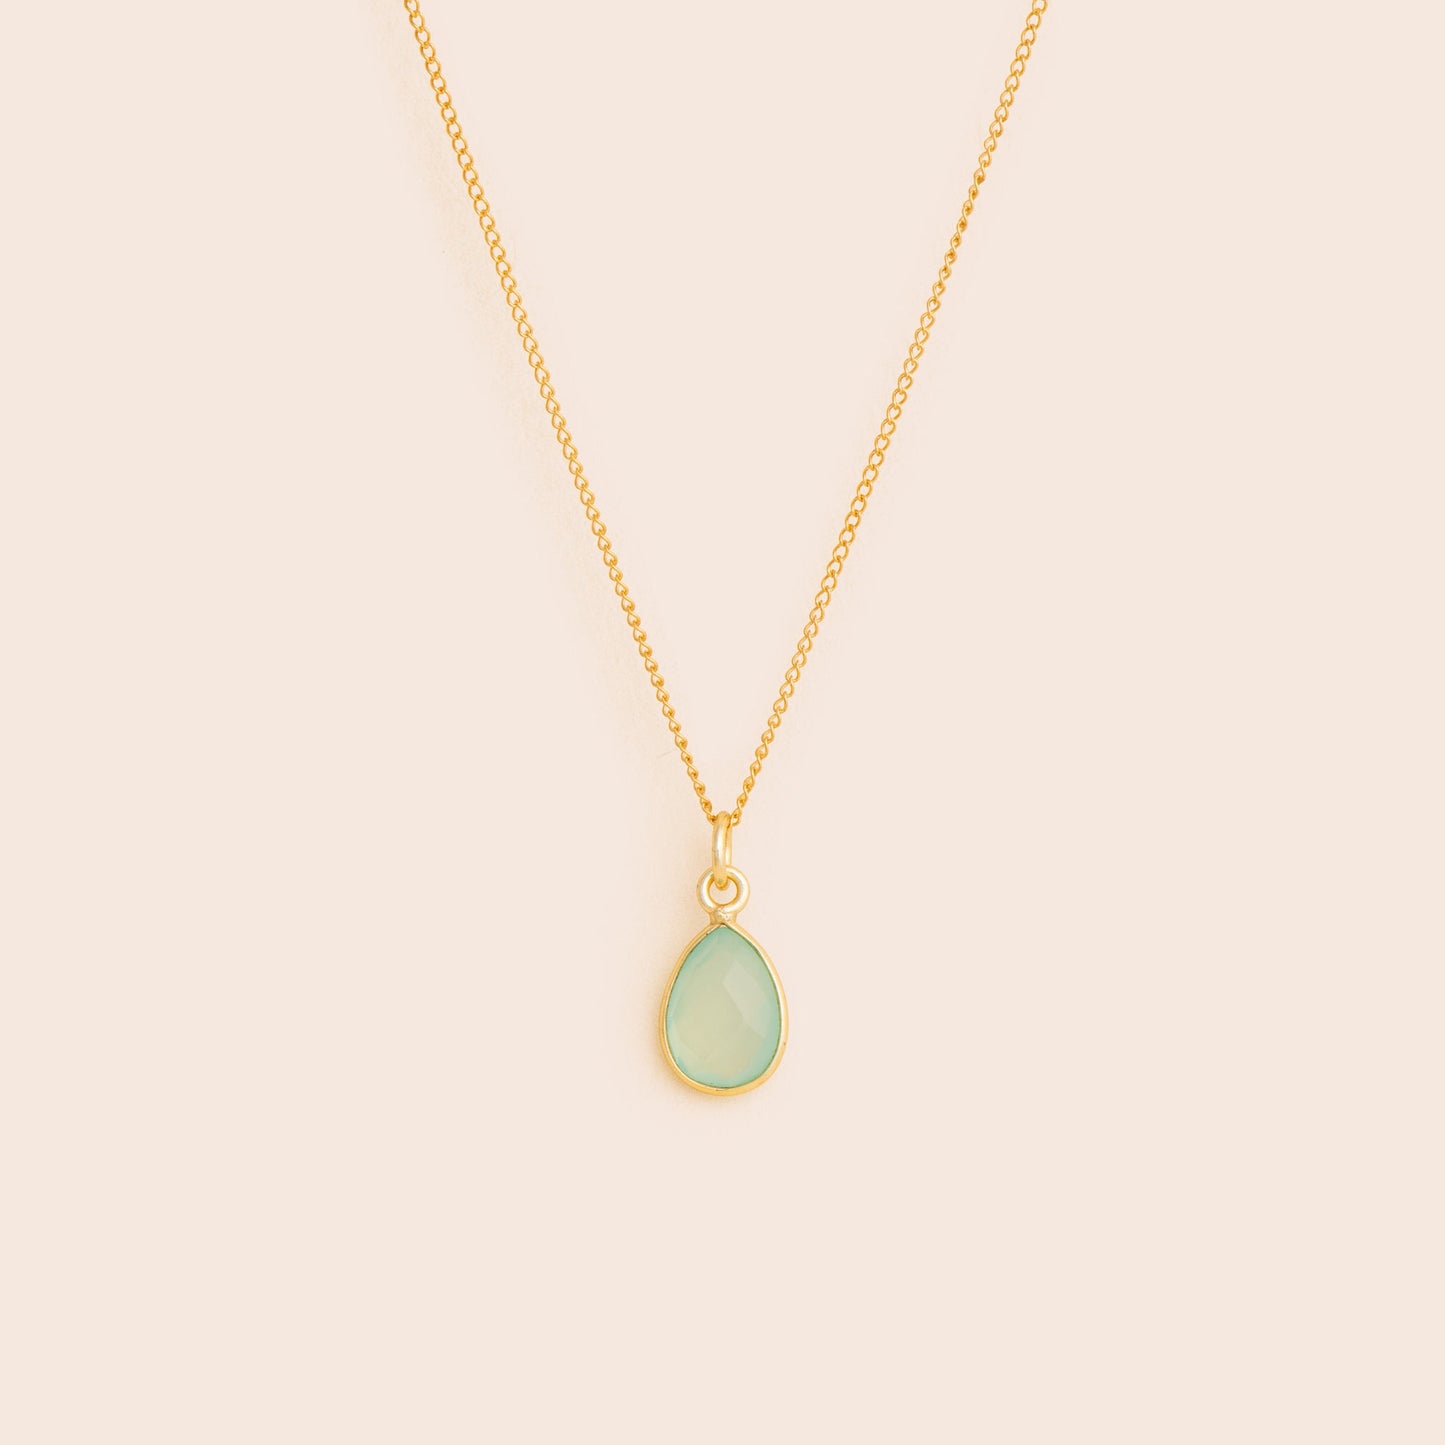 Load image into Gallery viewer, Aquamarine Drop Necklace - Gemlet
